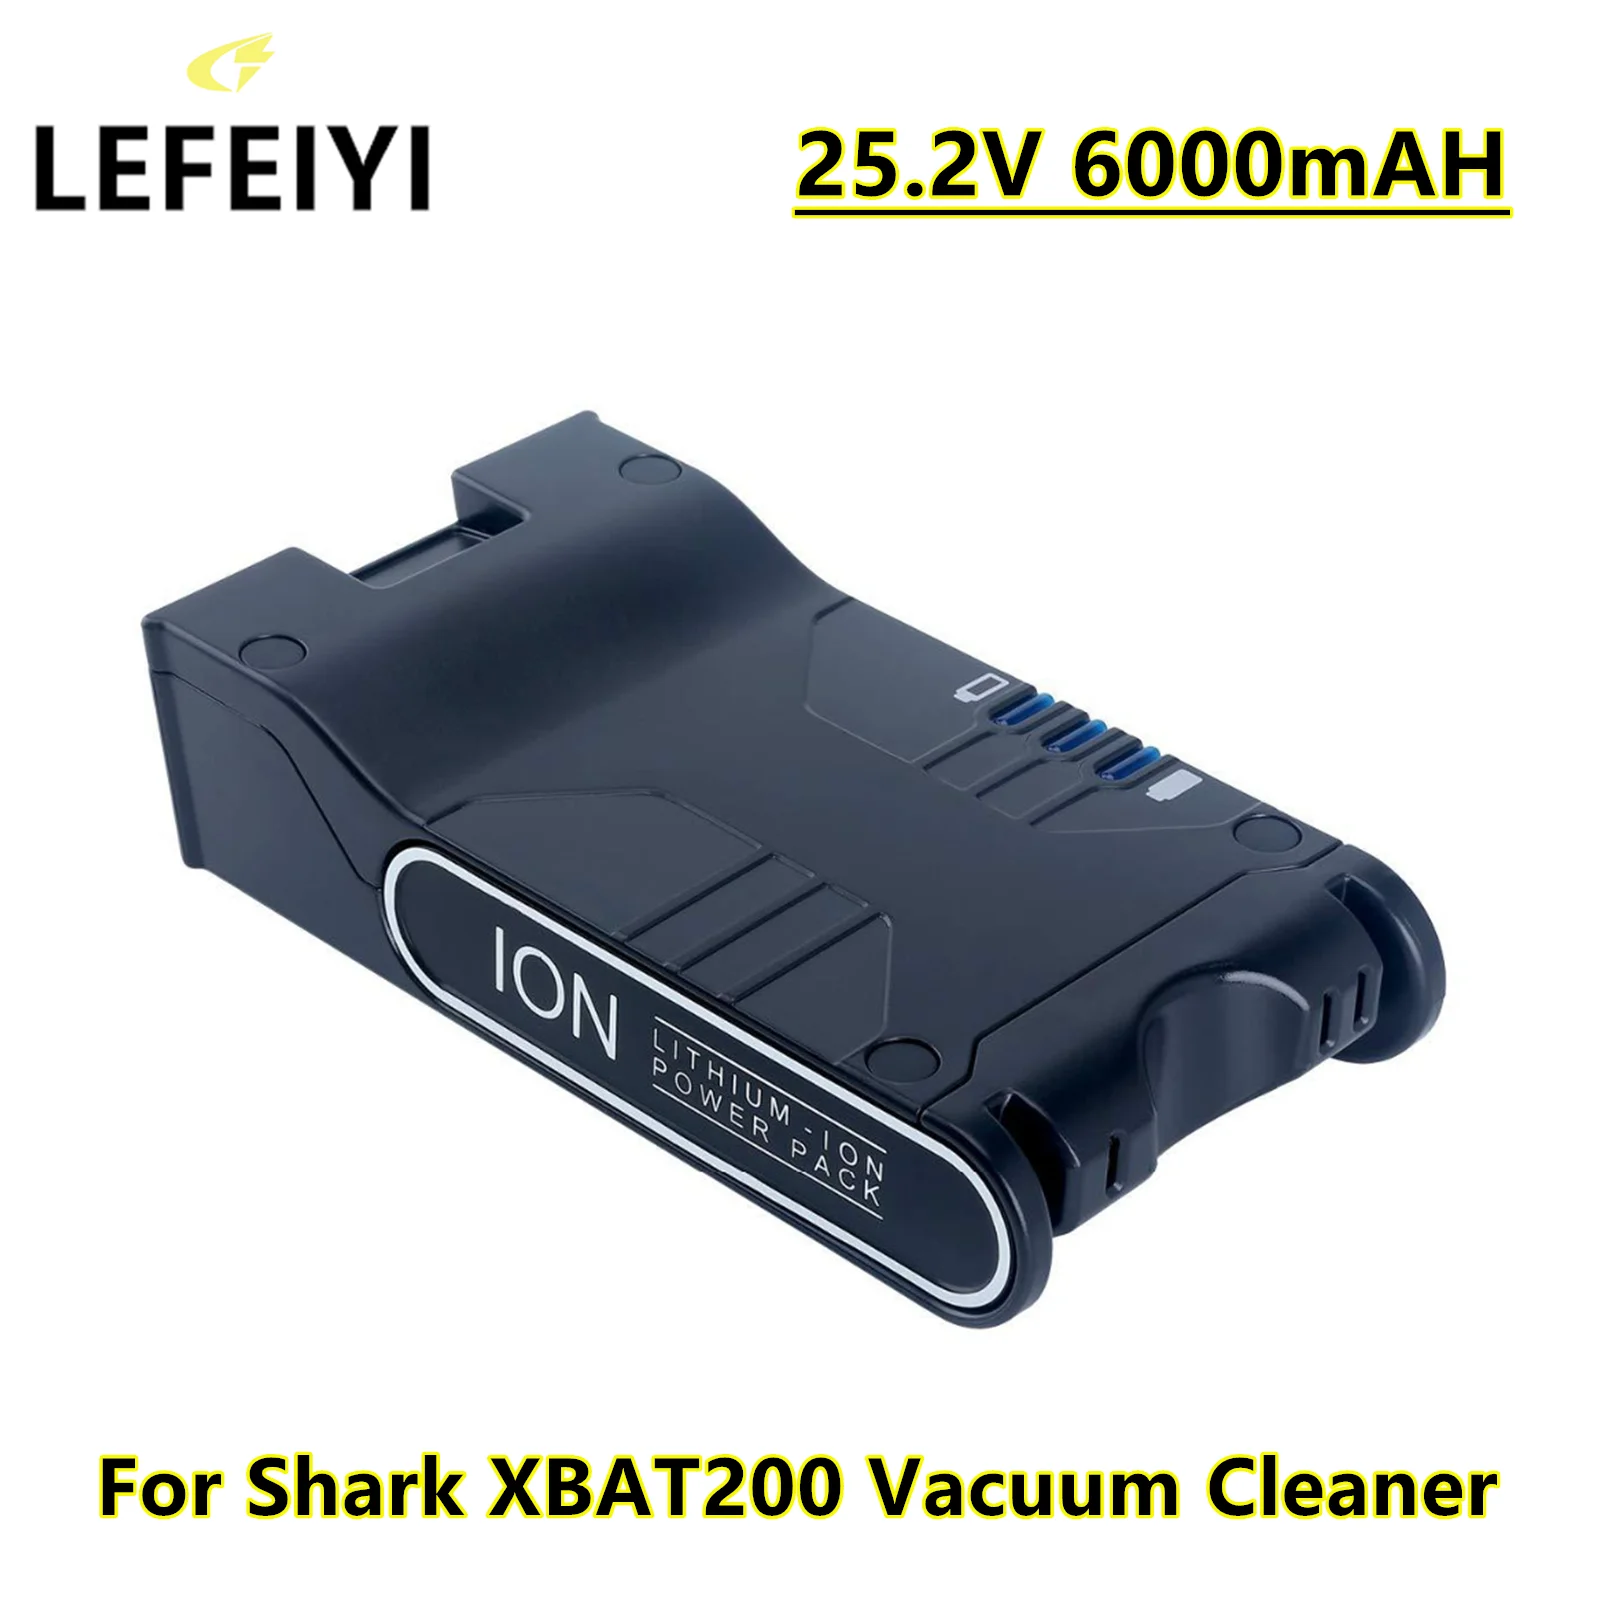 

LEFEIYI 25.2V 6000mAH Lithium-ion Battery Pack, For Shark XBAT200 ION Rocket IONFlex and IONFlex Cordless Vacuums Battery